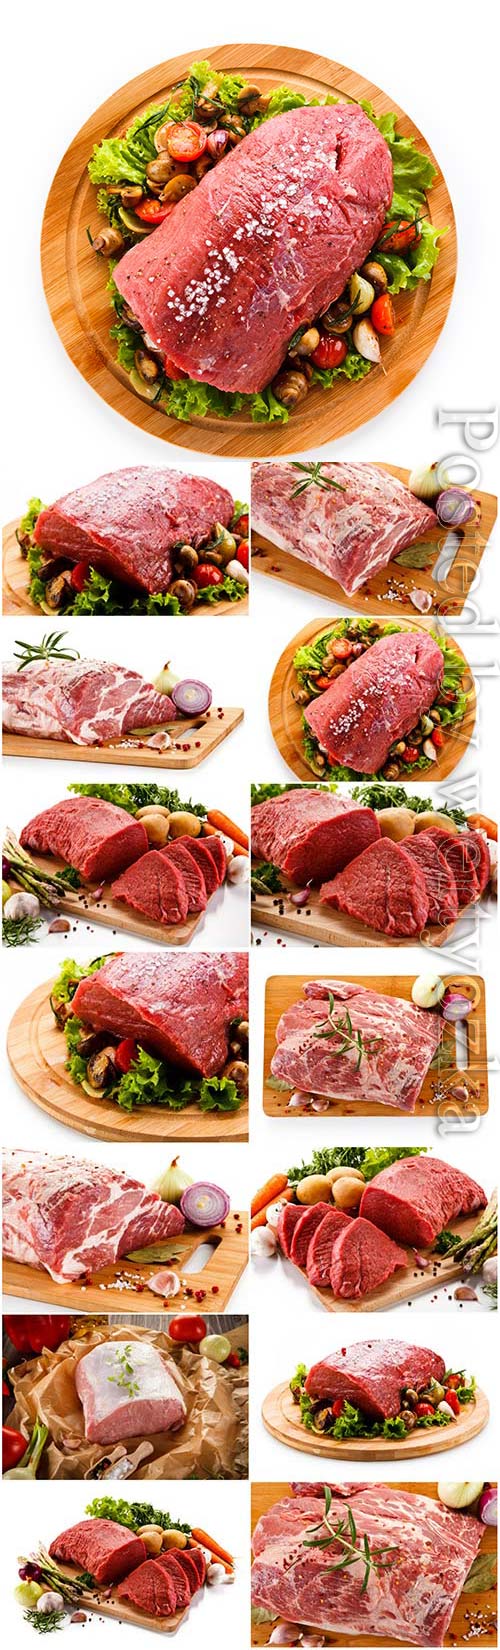 Fresh meat on a round wooden board stock photo